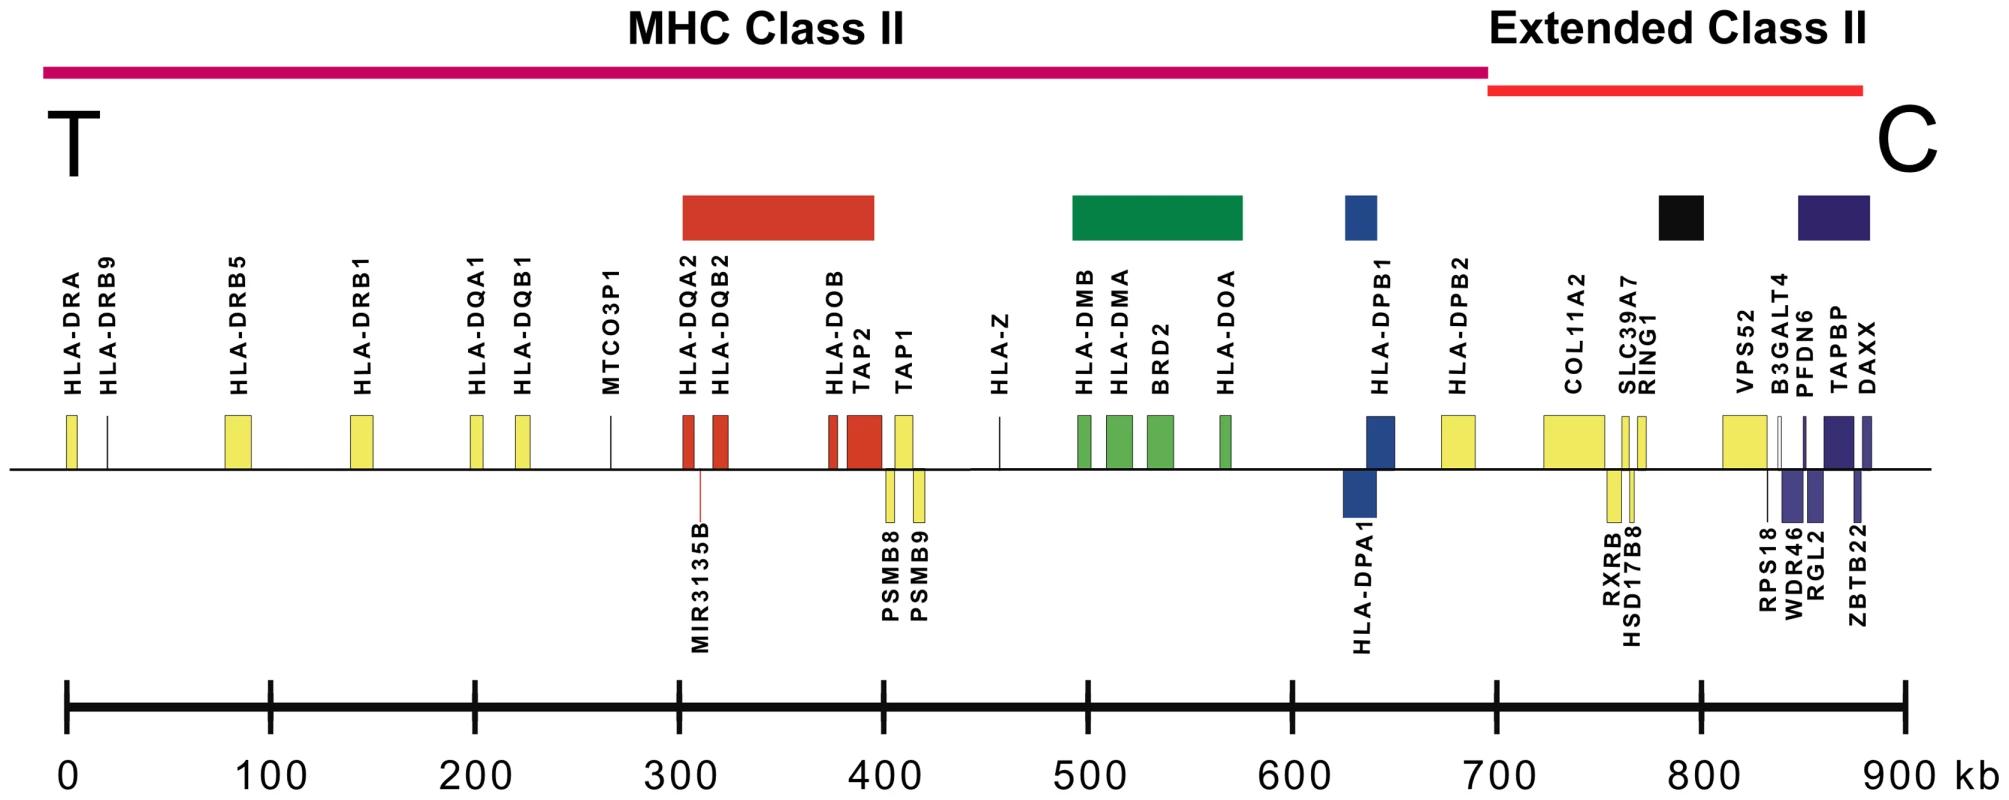 A map of the MHC class II and extended class II regions of chromosome 6p21.